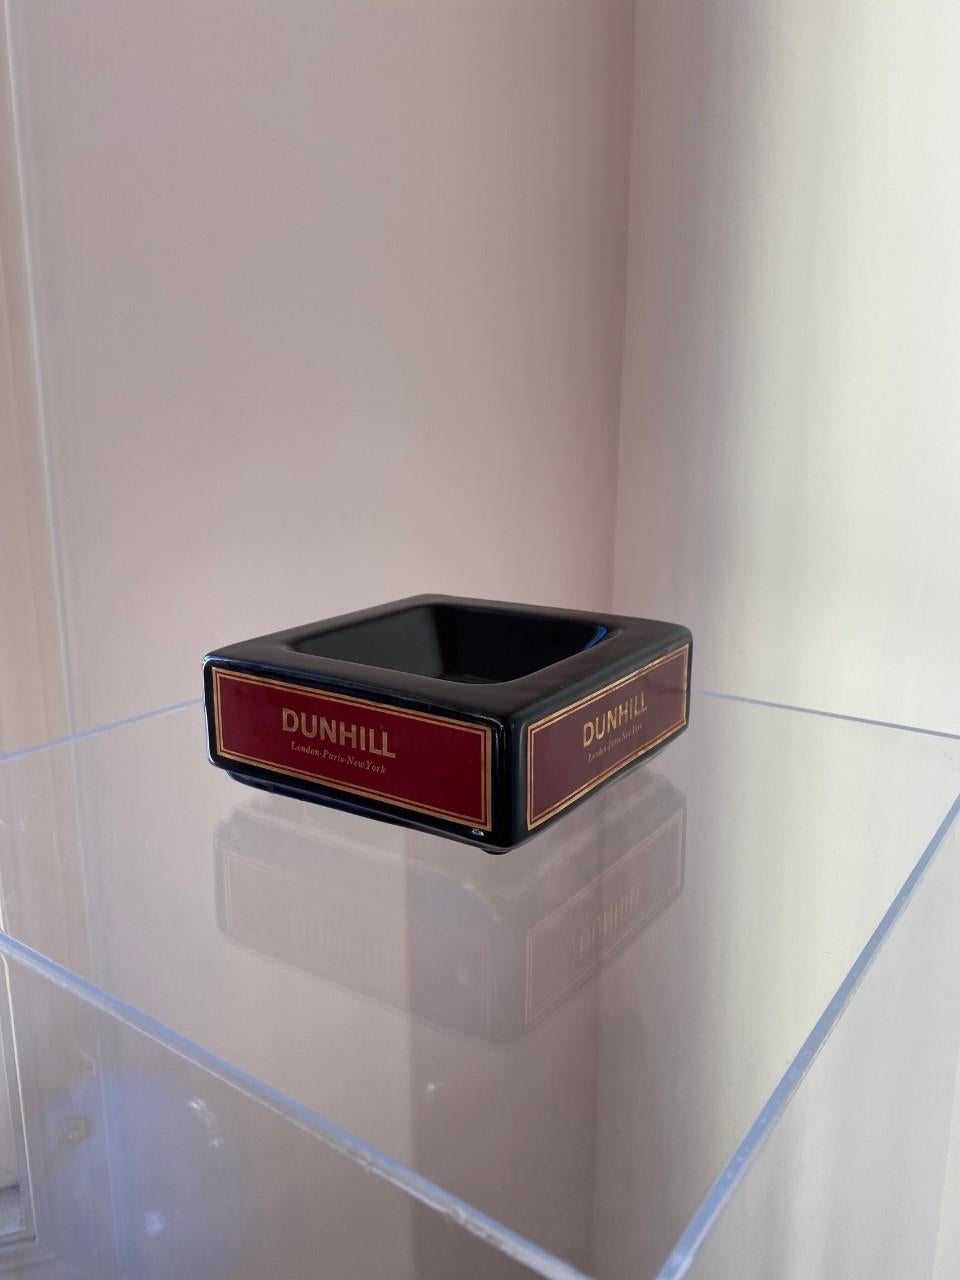 Square ceramic ashtray with black high gloss glaze, features red and gold Dunhill label on all four sides. Has four small feet to elevate it off a table surface. Dimensions: 5.75” width x 5.75” depth x 2.55” height. This piece is timeless and